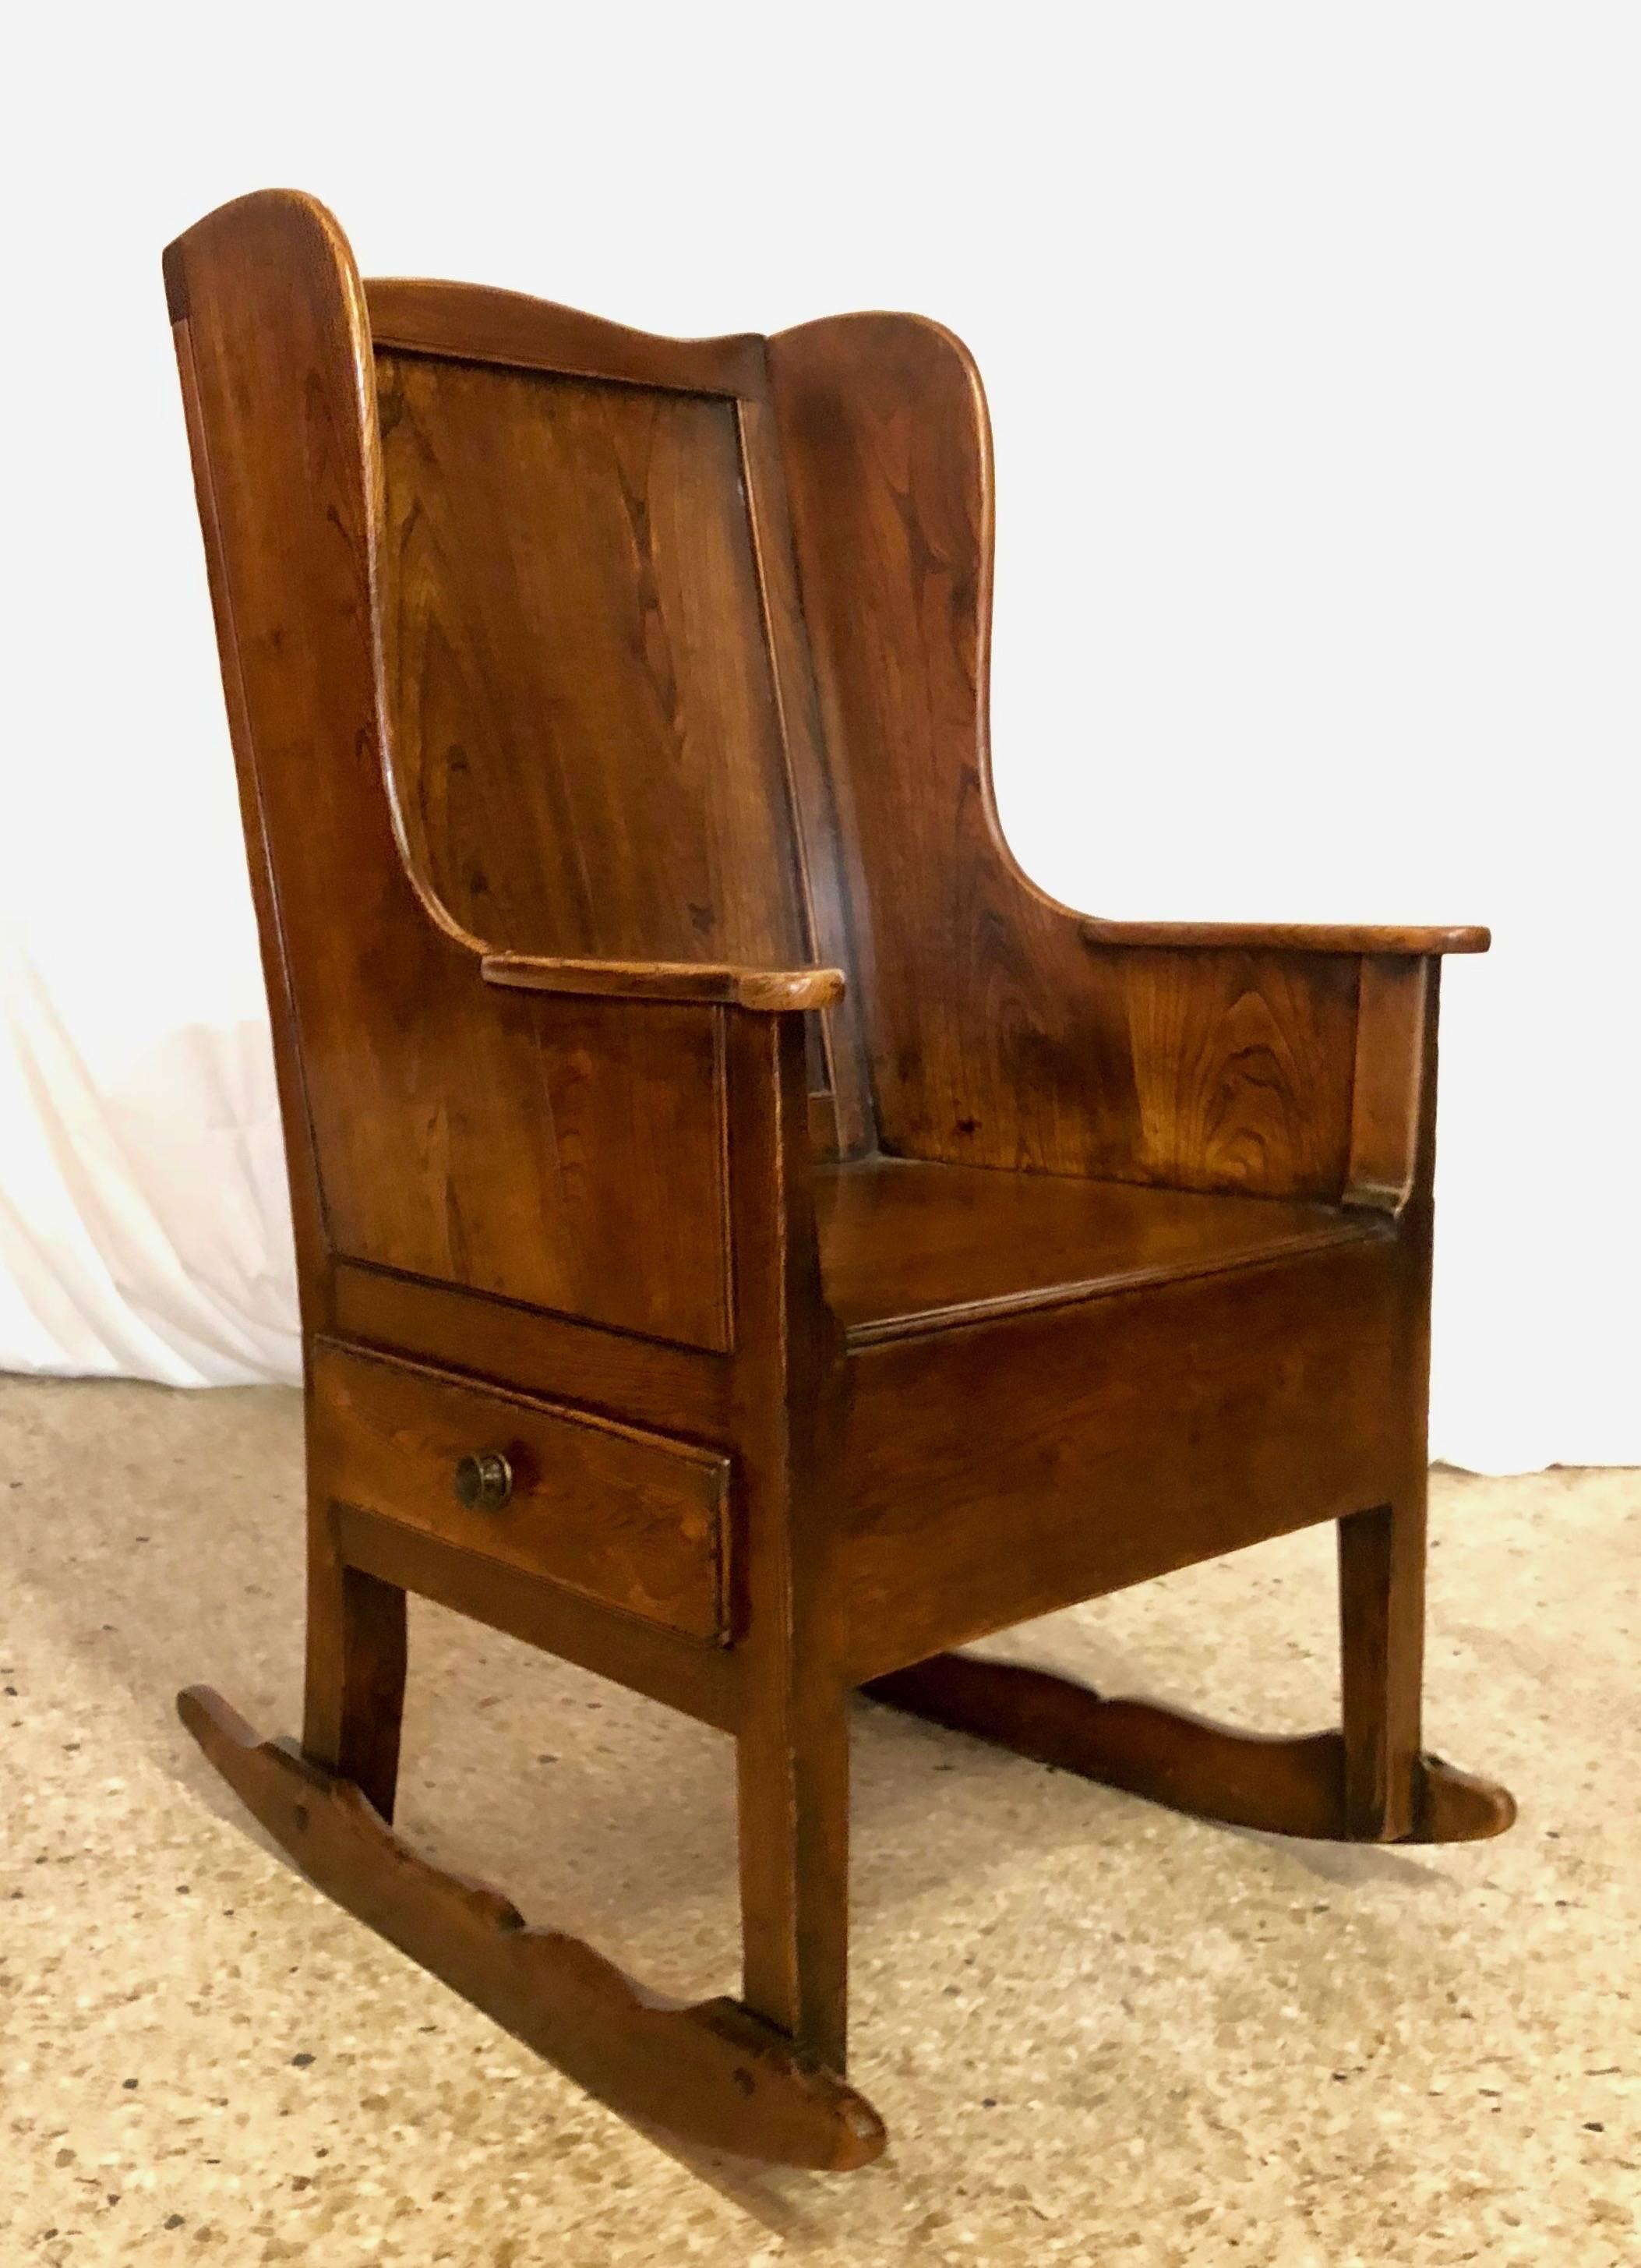 This sturdy, practially indestructible chair has a little drawer on one side, perfectly suited for storing that good book you are reading or knitting or anything else!